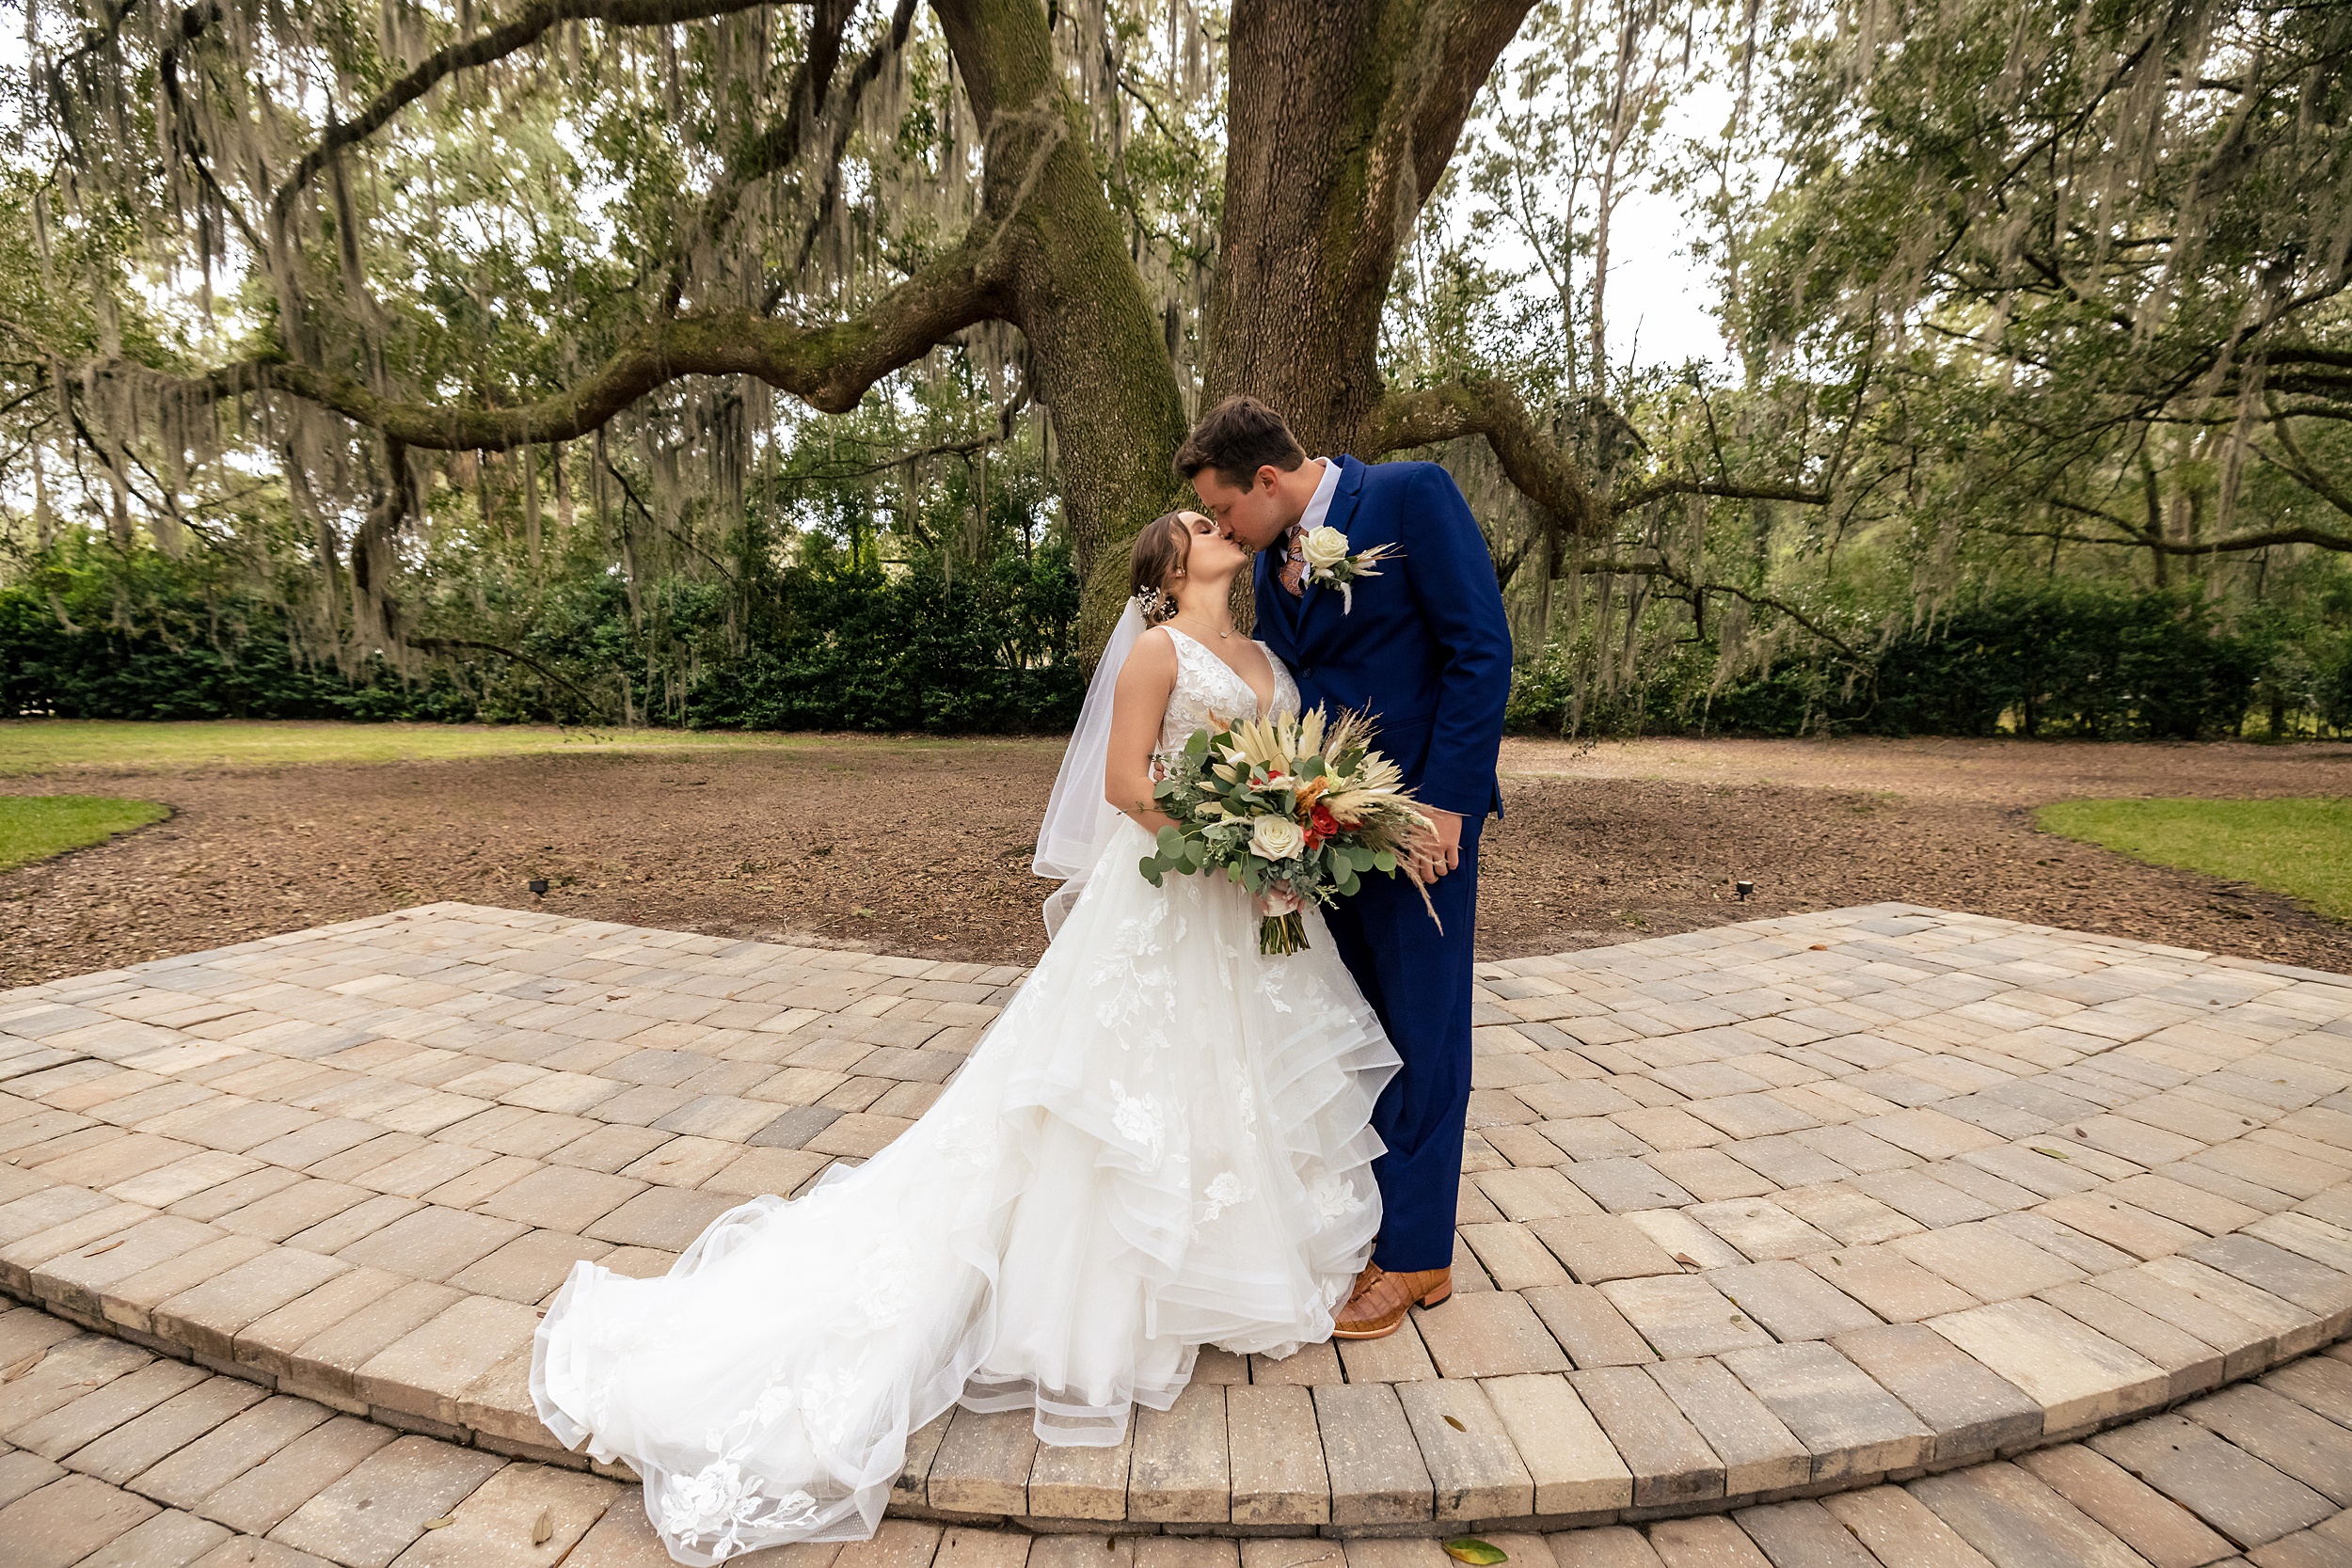 Newlyweds kiss while standing under a large oak tree on raised patio